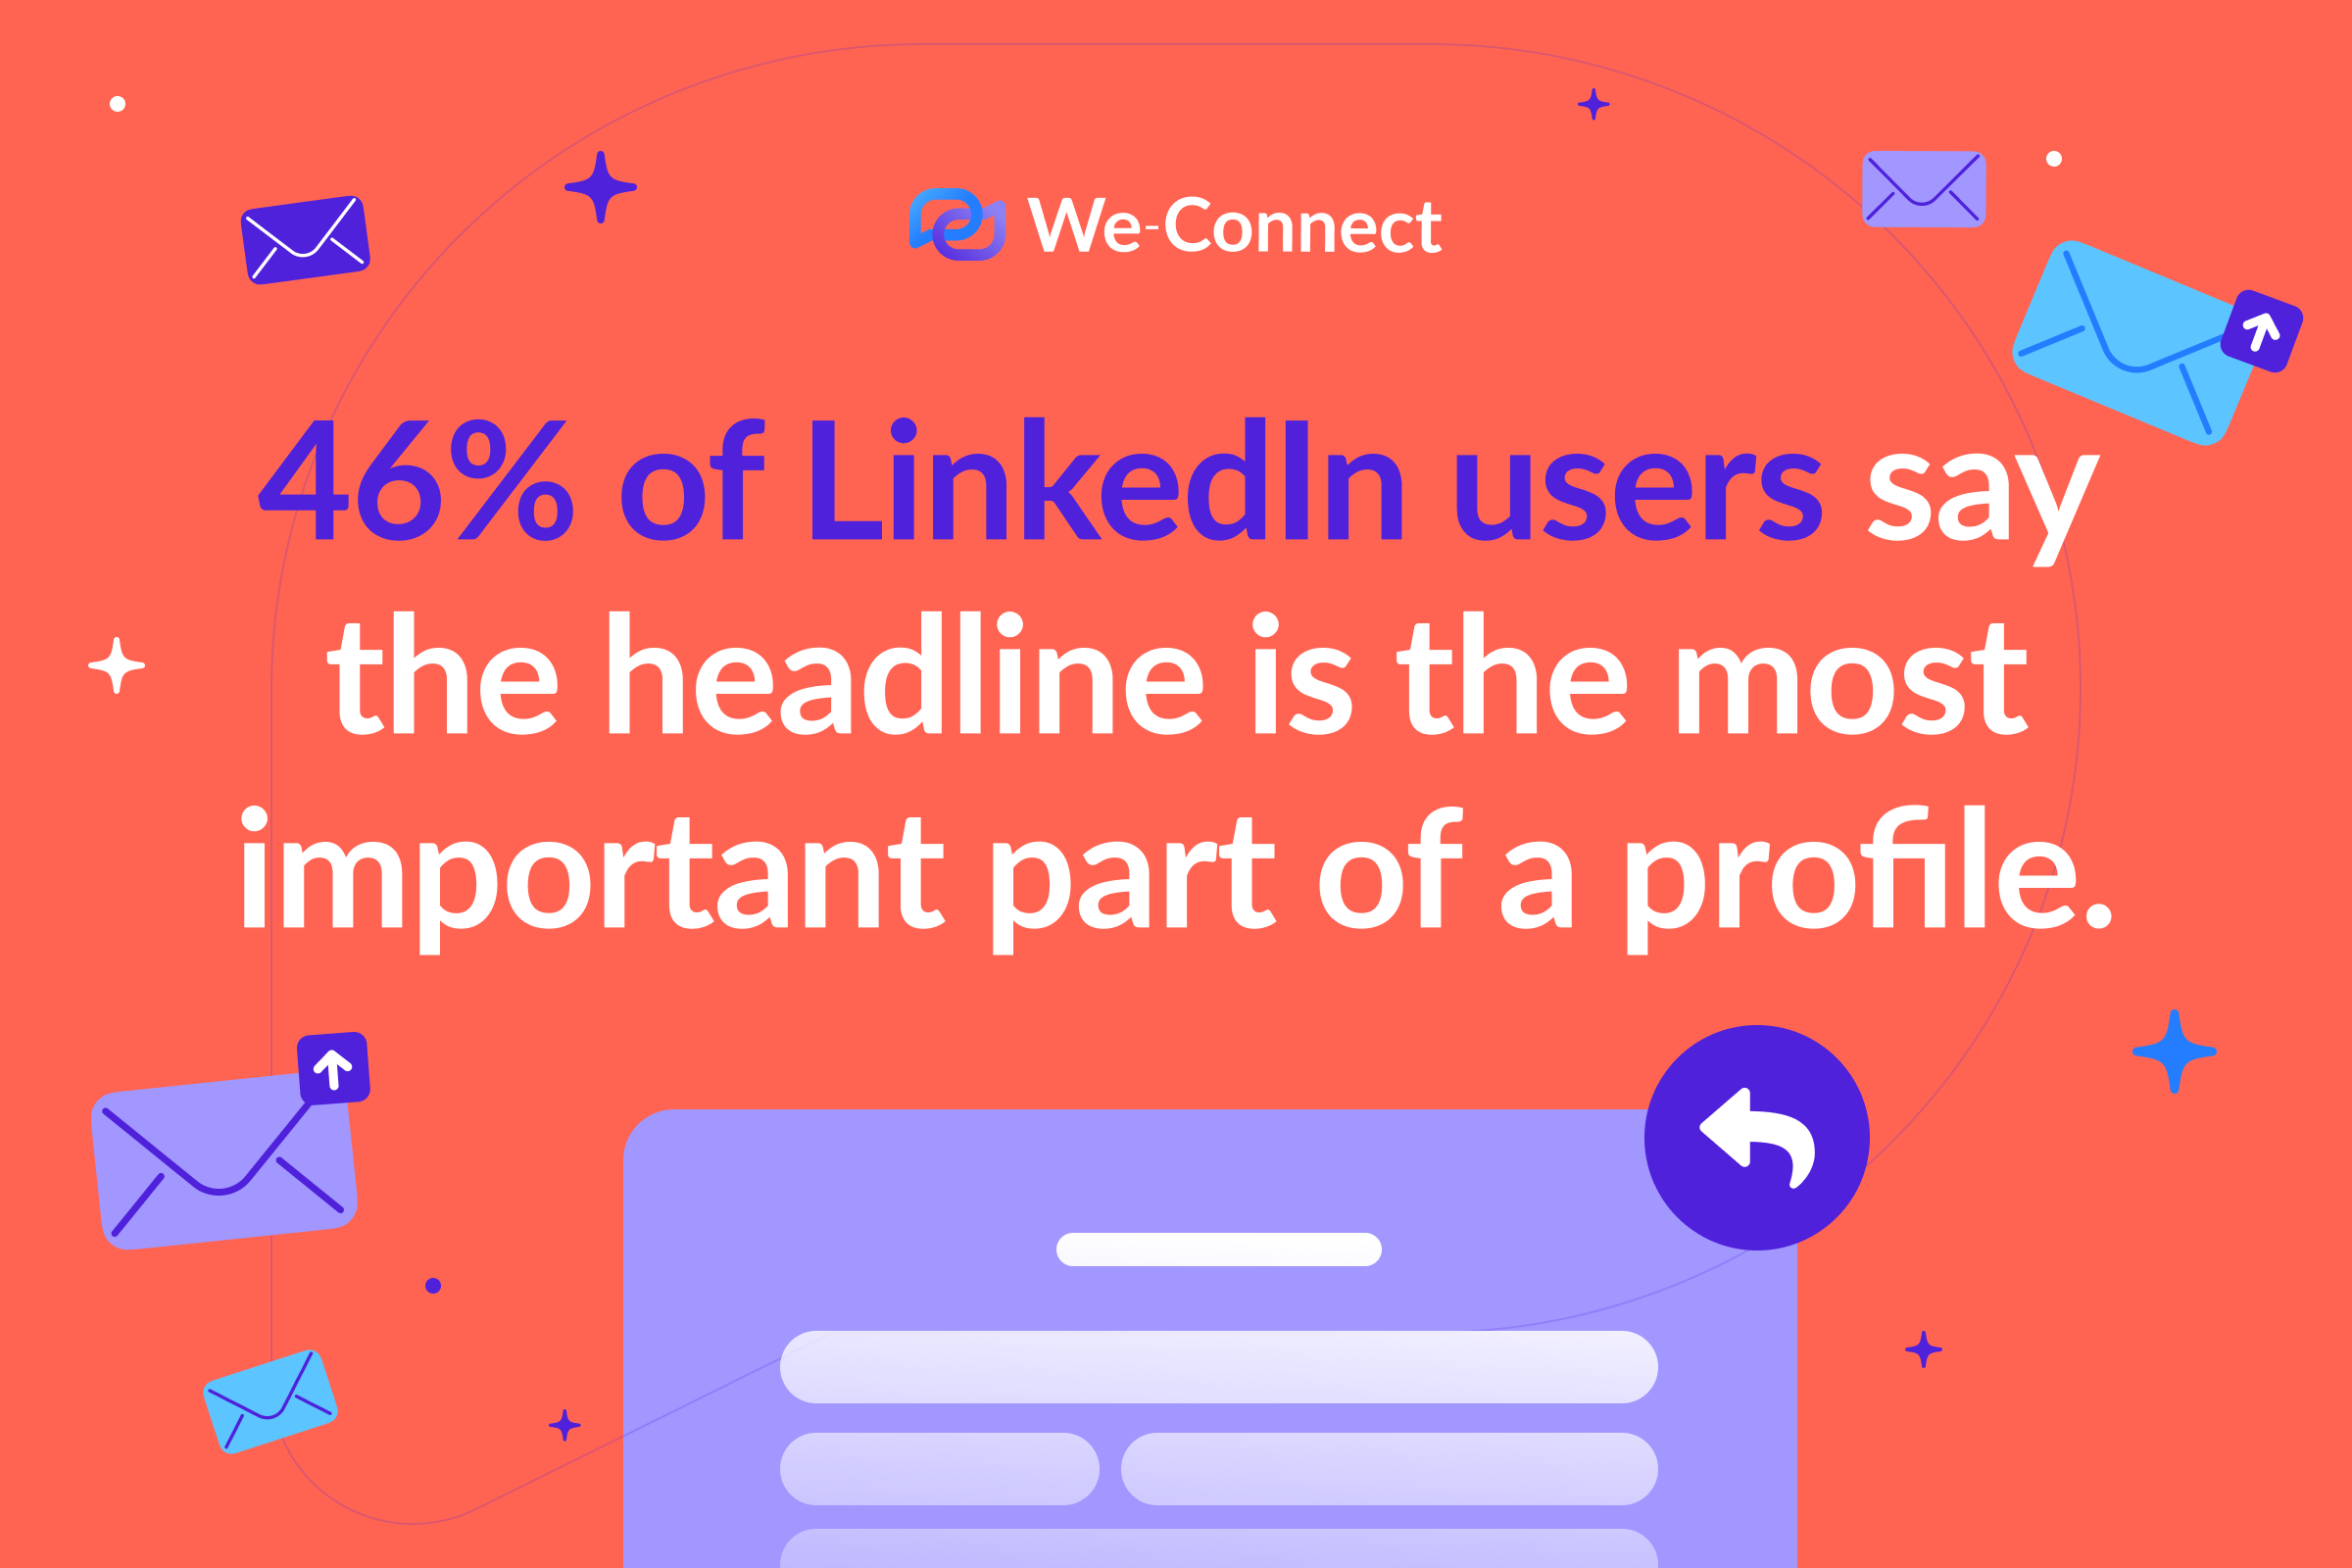 46% of LinkedIn users say the headline is the most important part of a profile